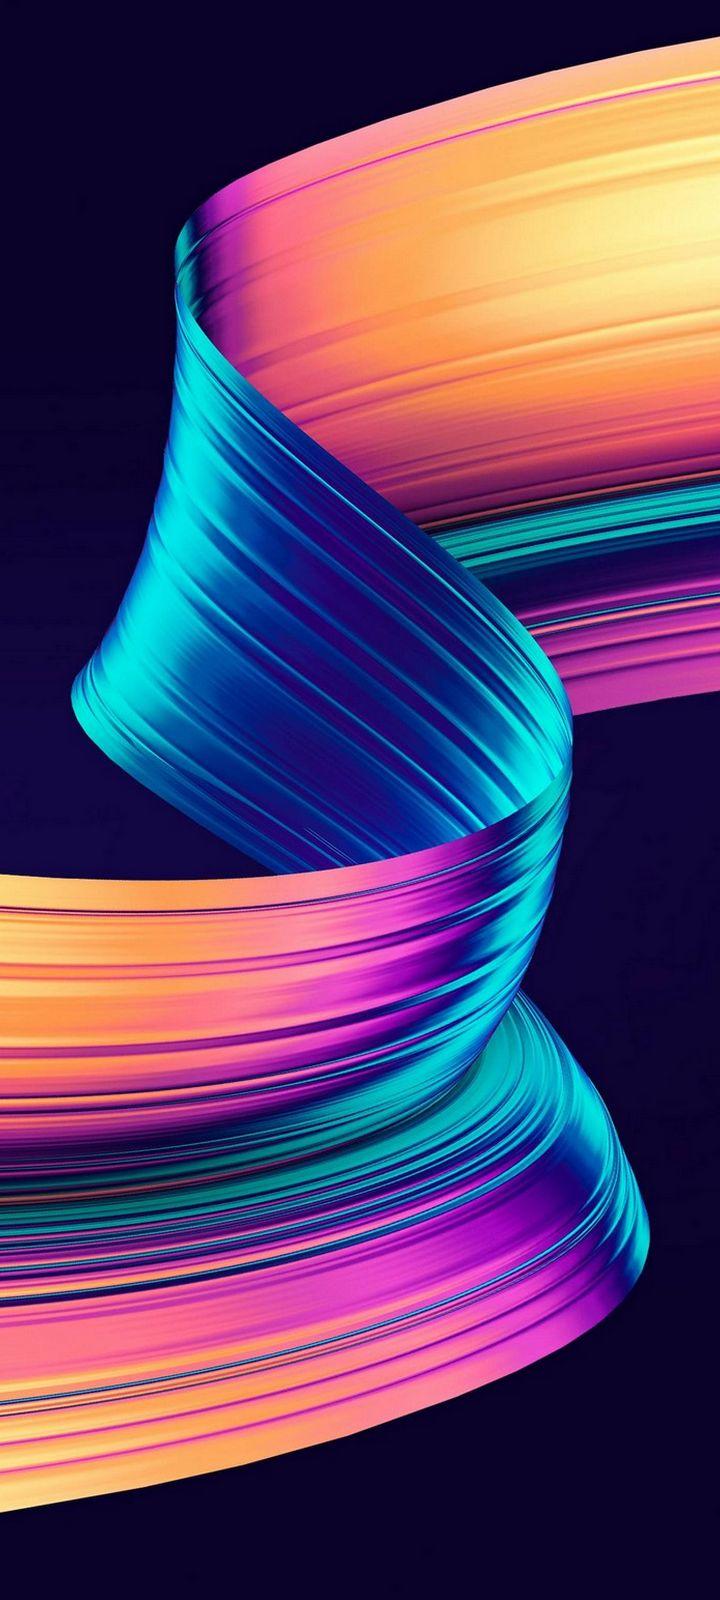 Girly 3D Layer Abstract Wallpaper - [720x1600]